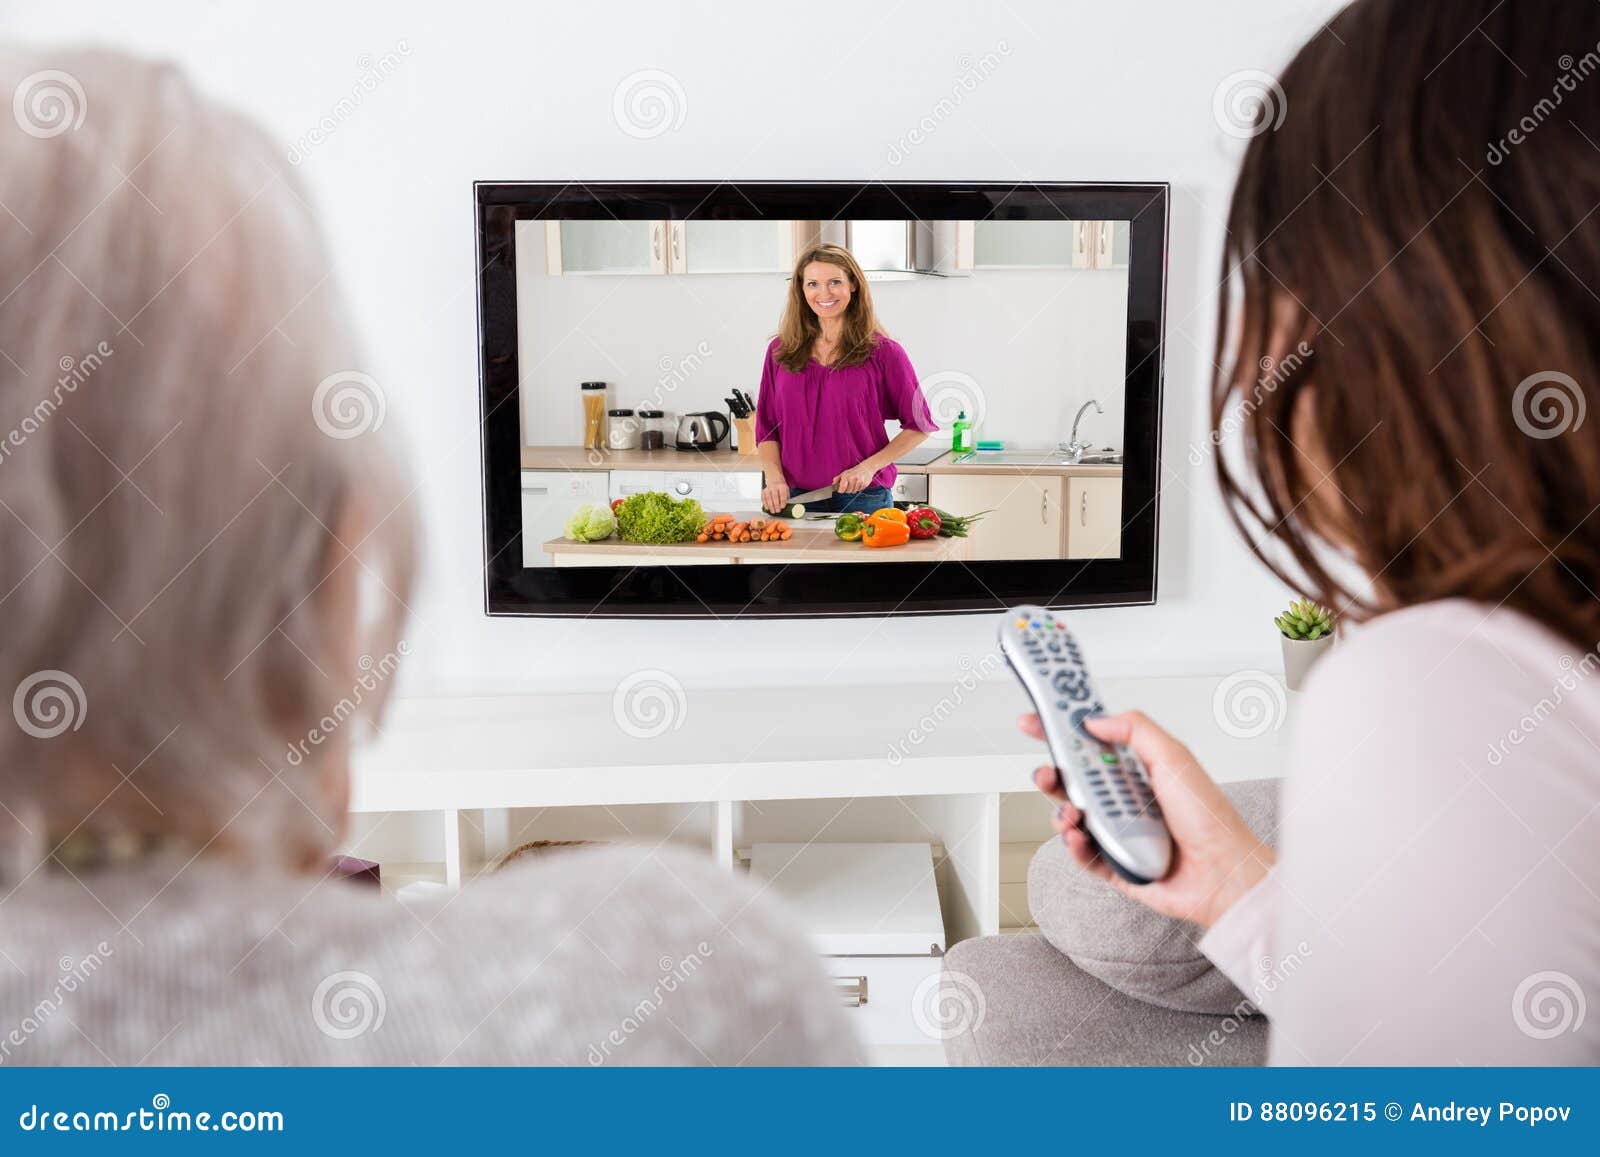 two women watching cooking show on television